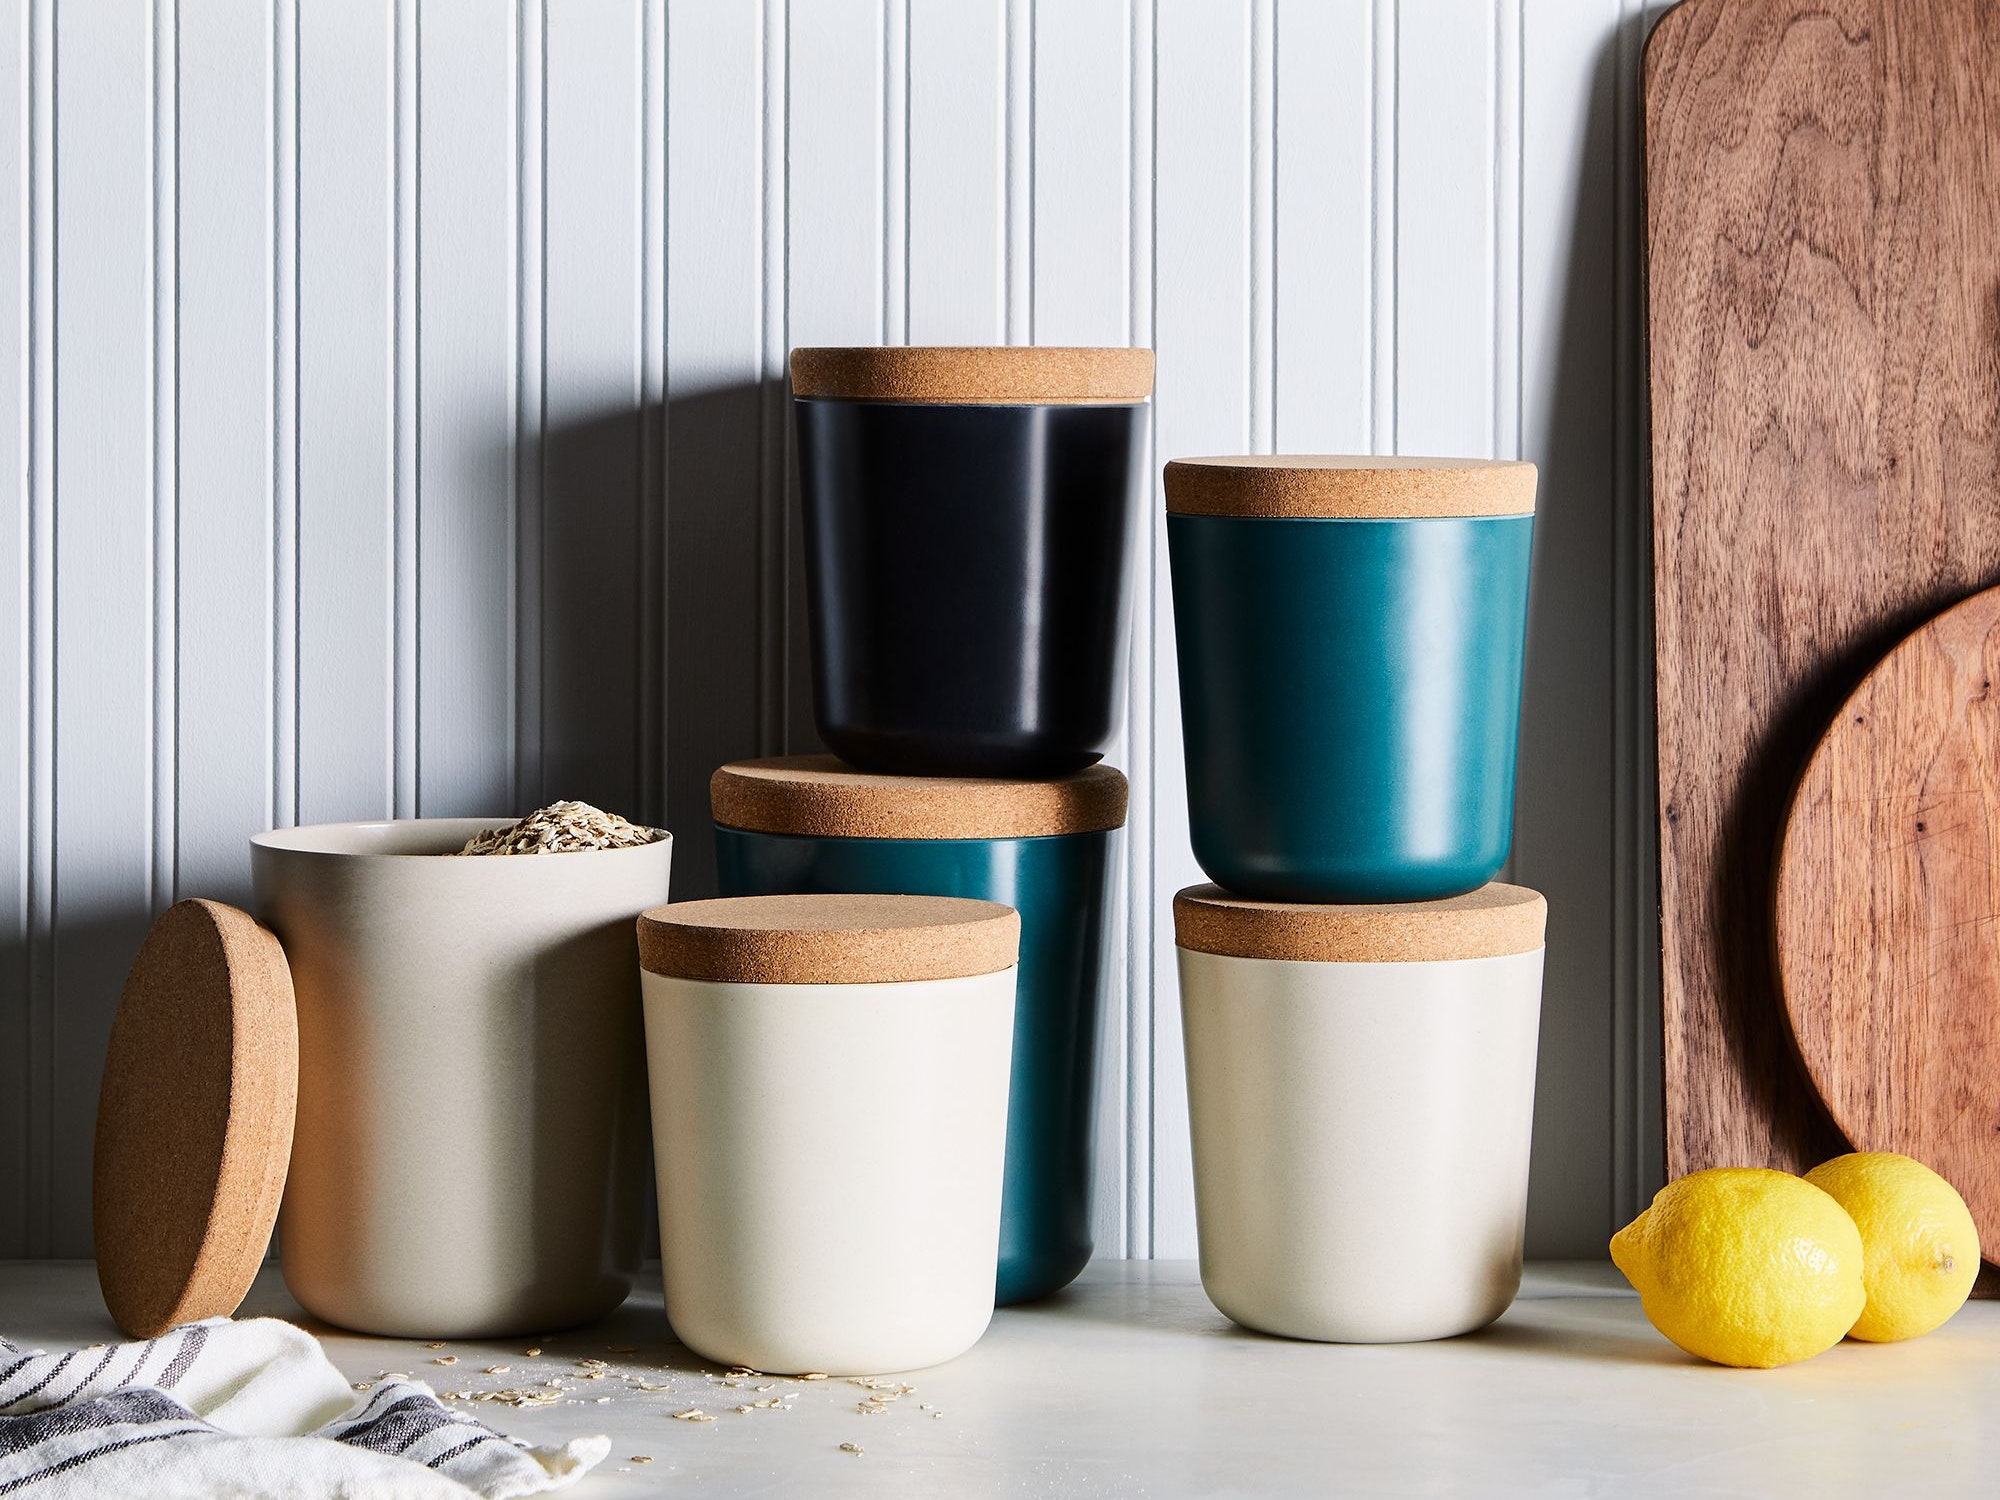 Eco-Friendly Sustainable Kitchen Products: 7 Sustainable Kitchen